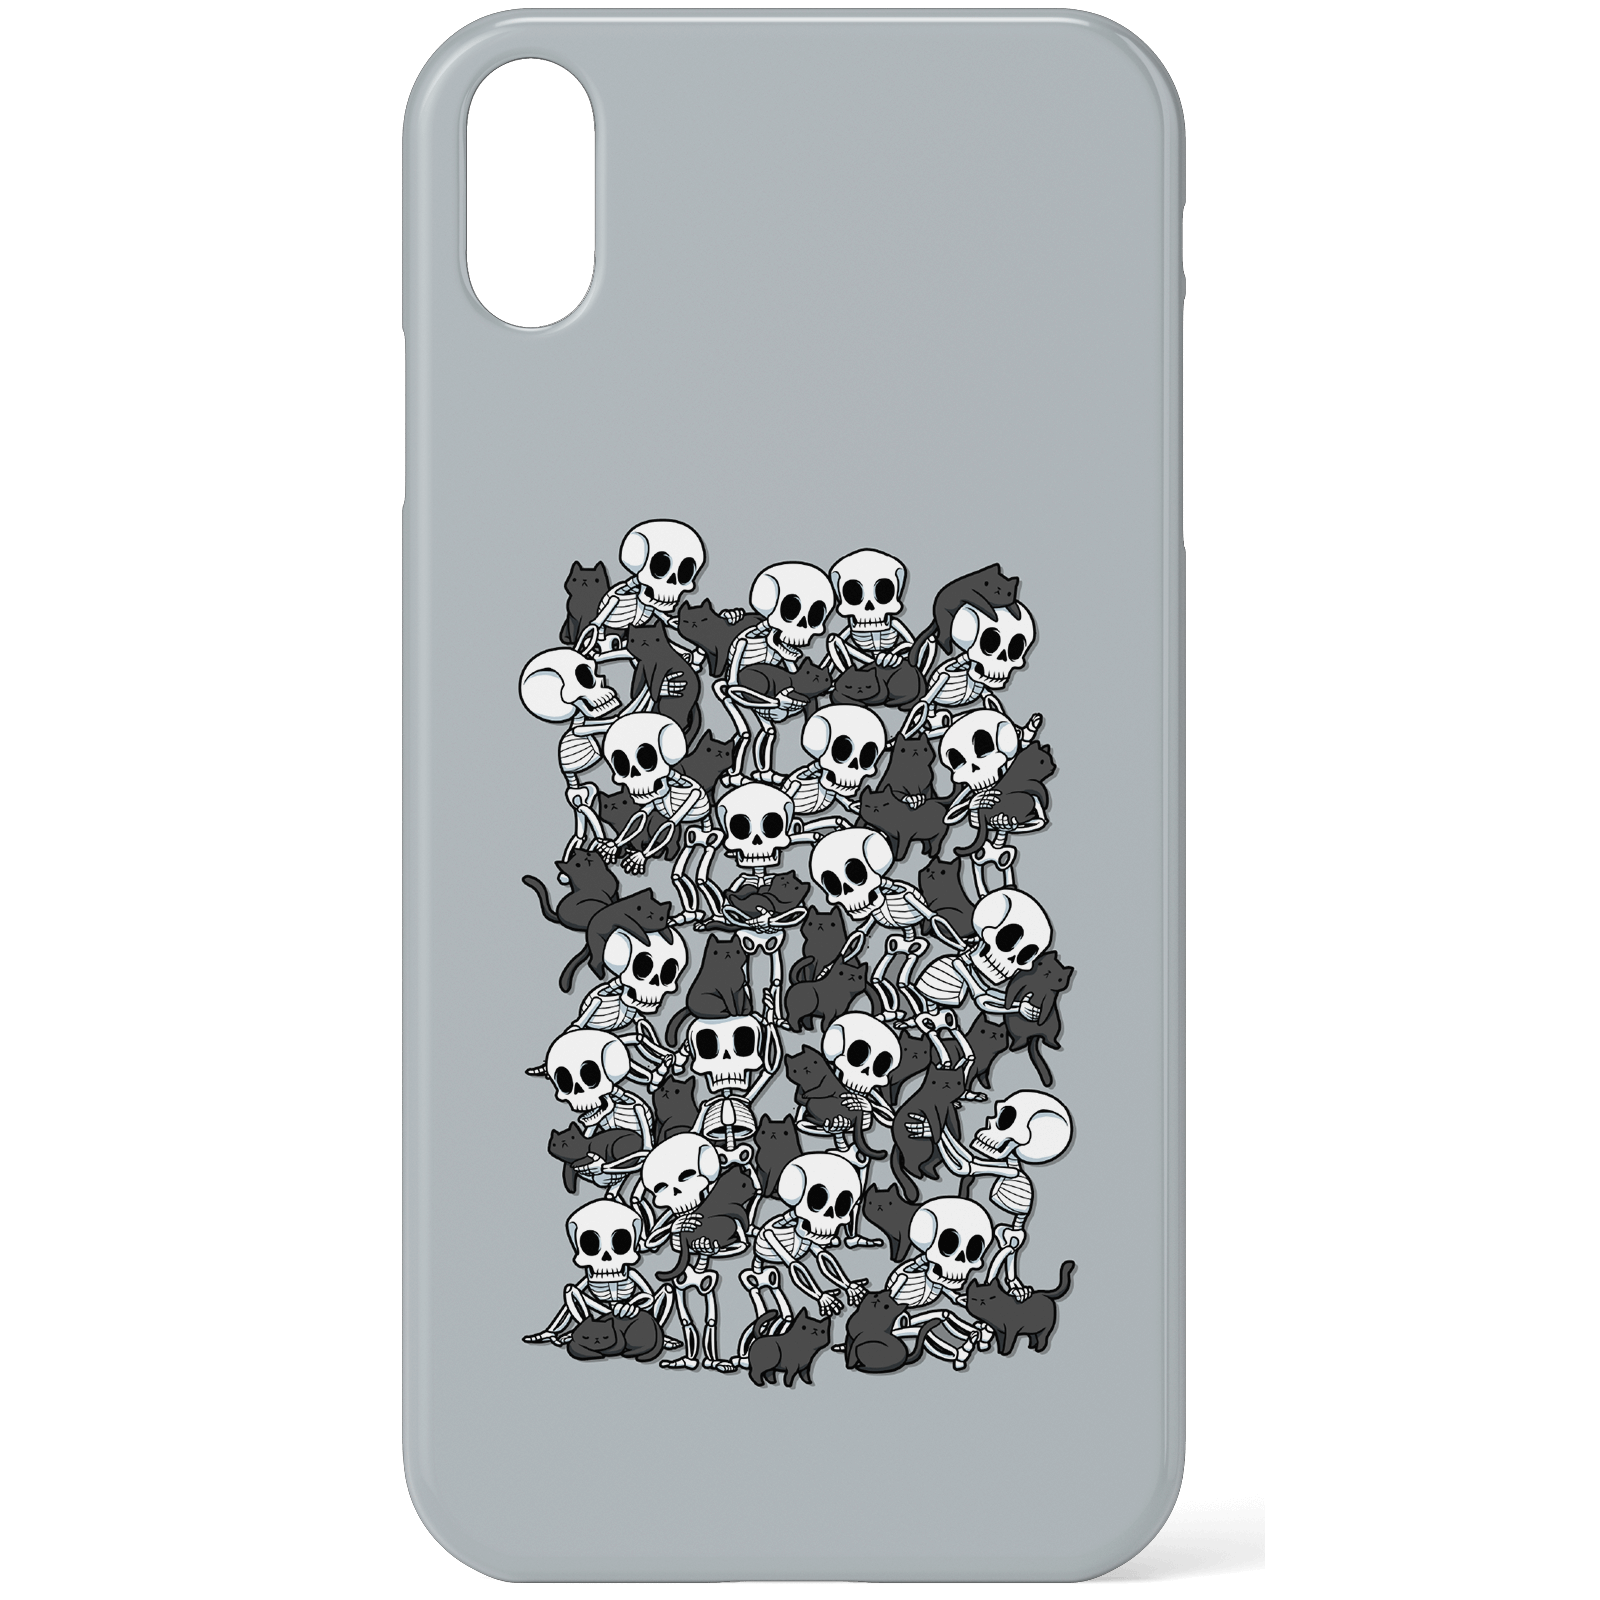 Cat Skull Party Phone Case for iPhone and Android - iPhone XS - Snap Case - Matte